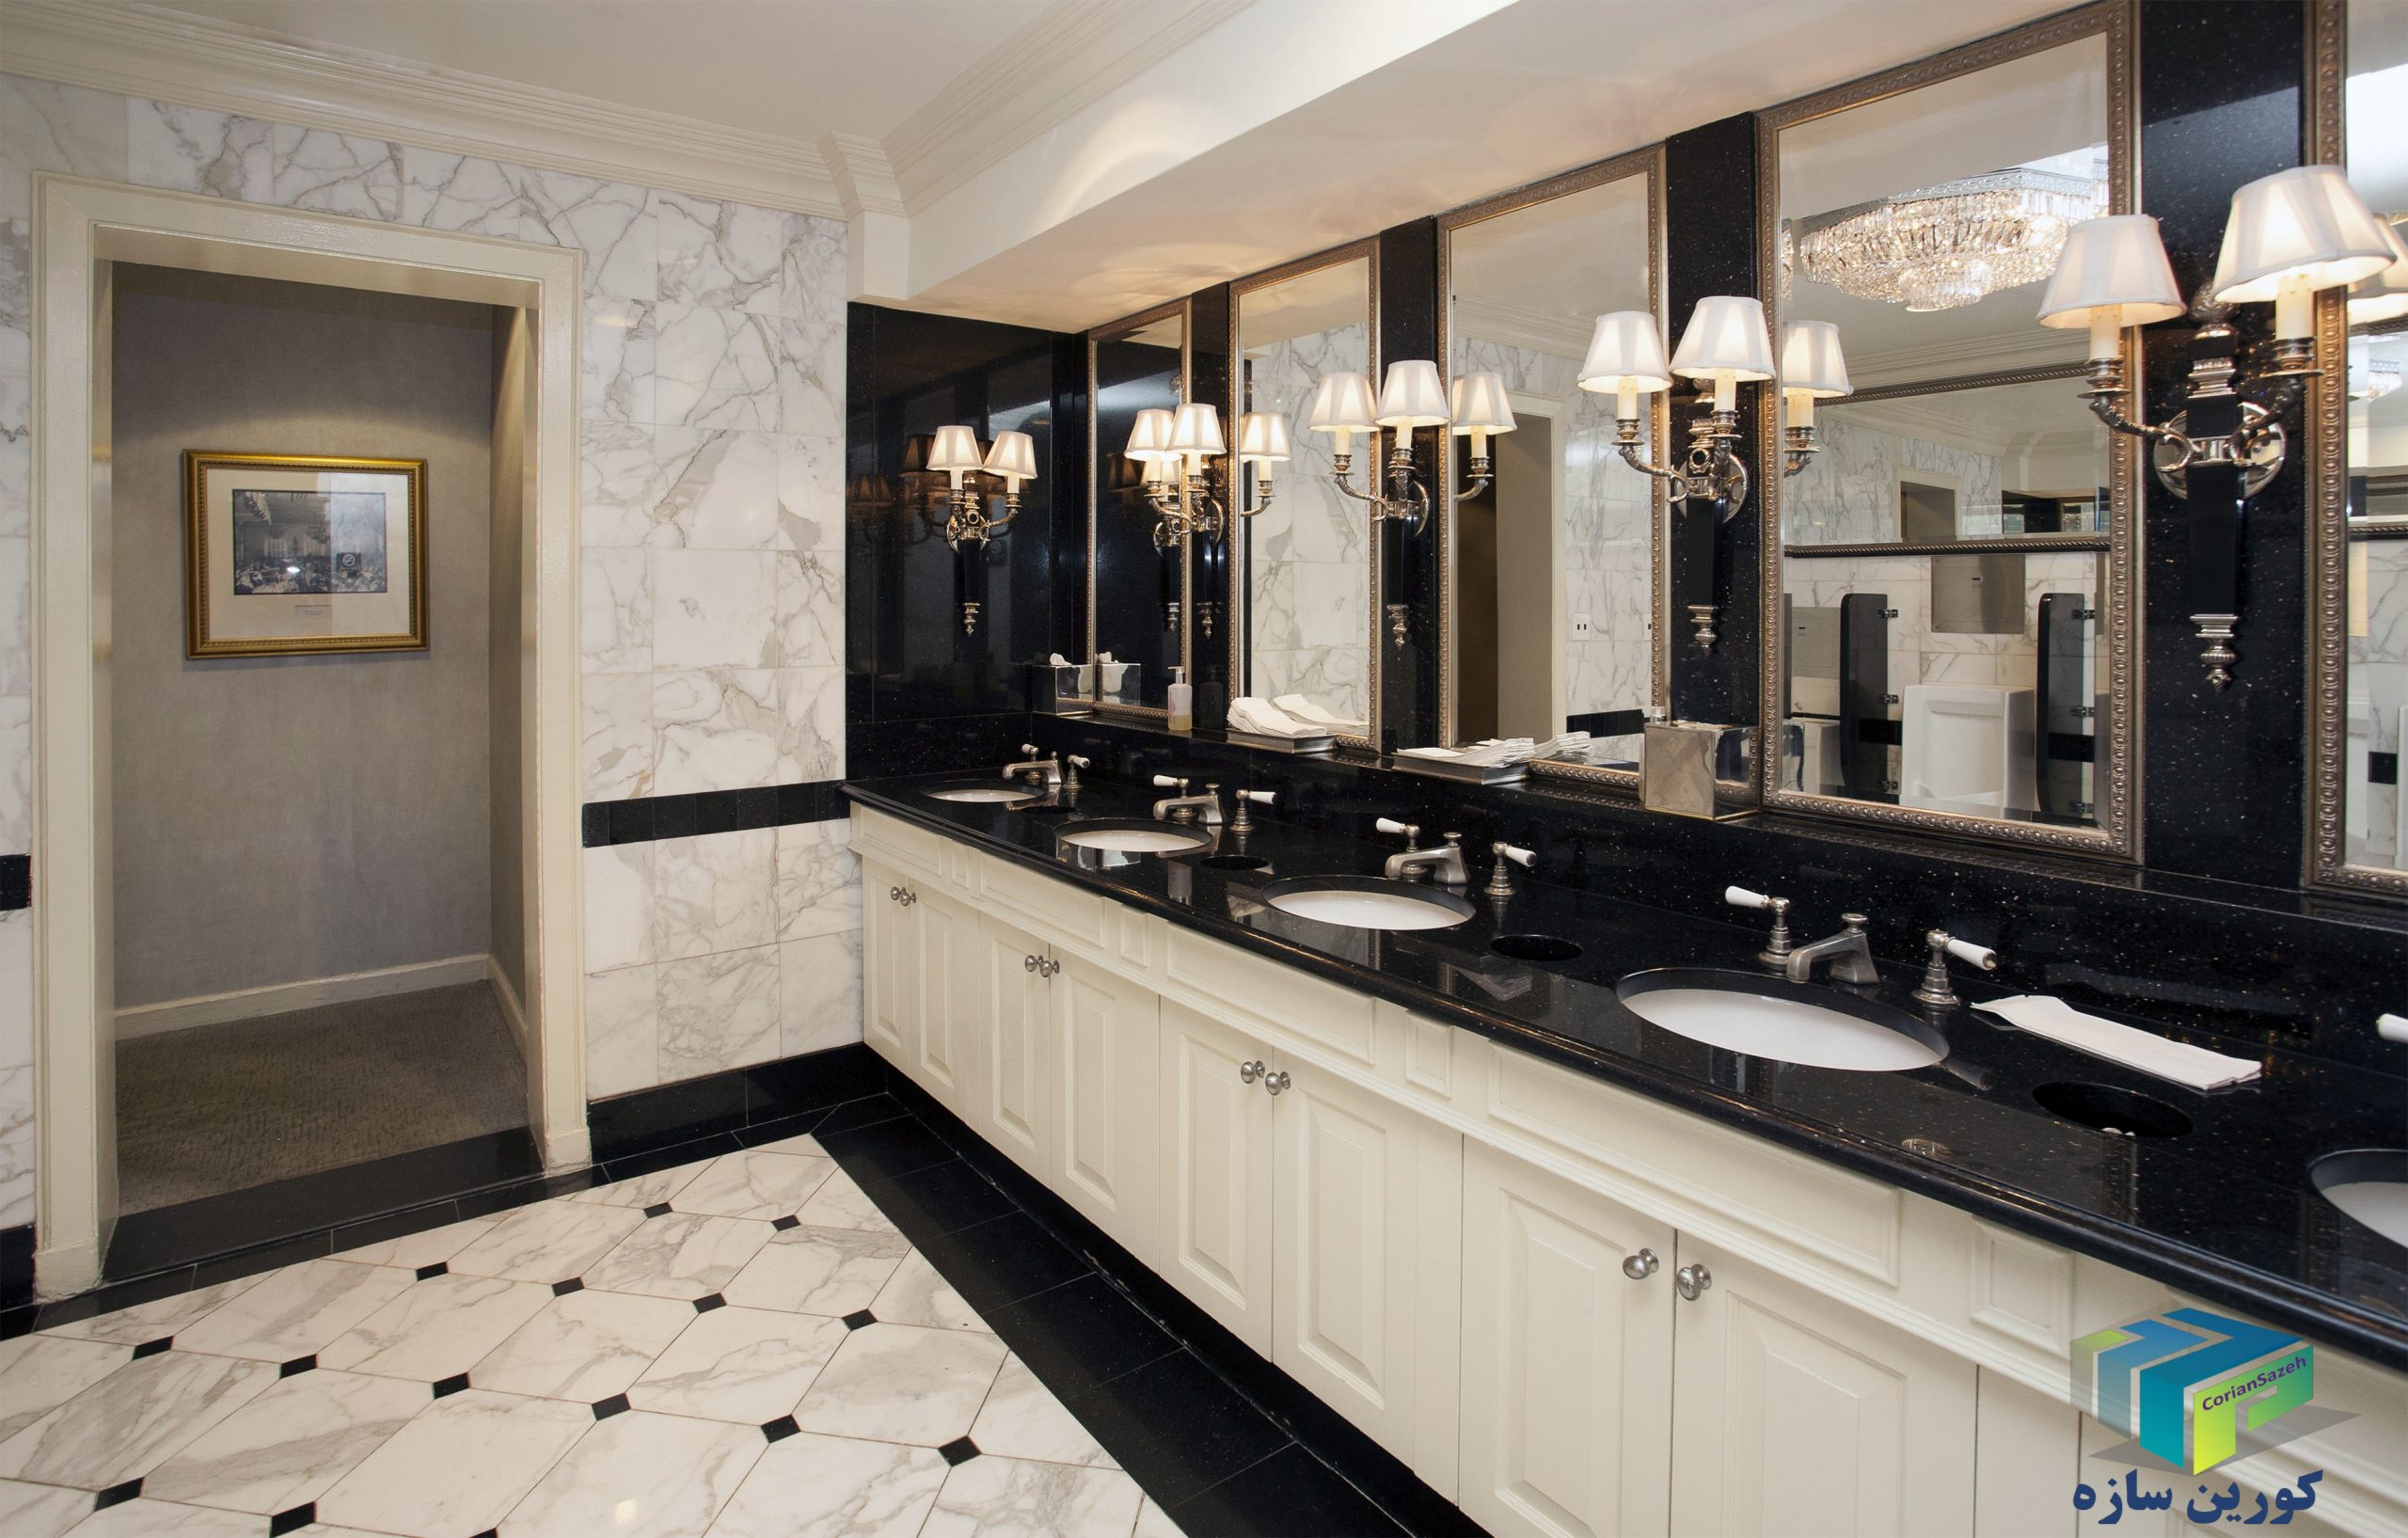 check out america 39 best restrooms and vote for your favorite scaled